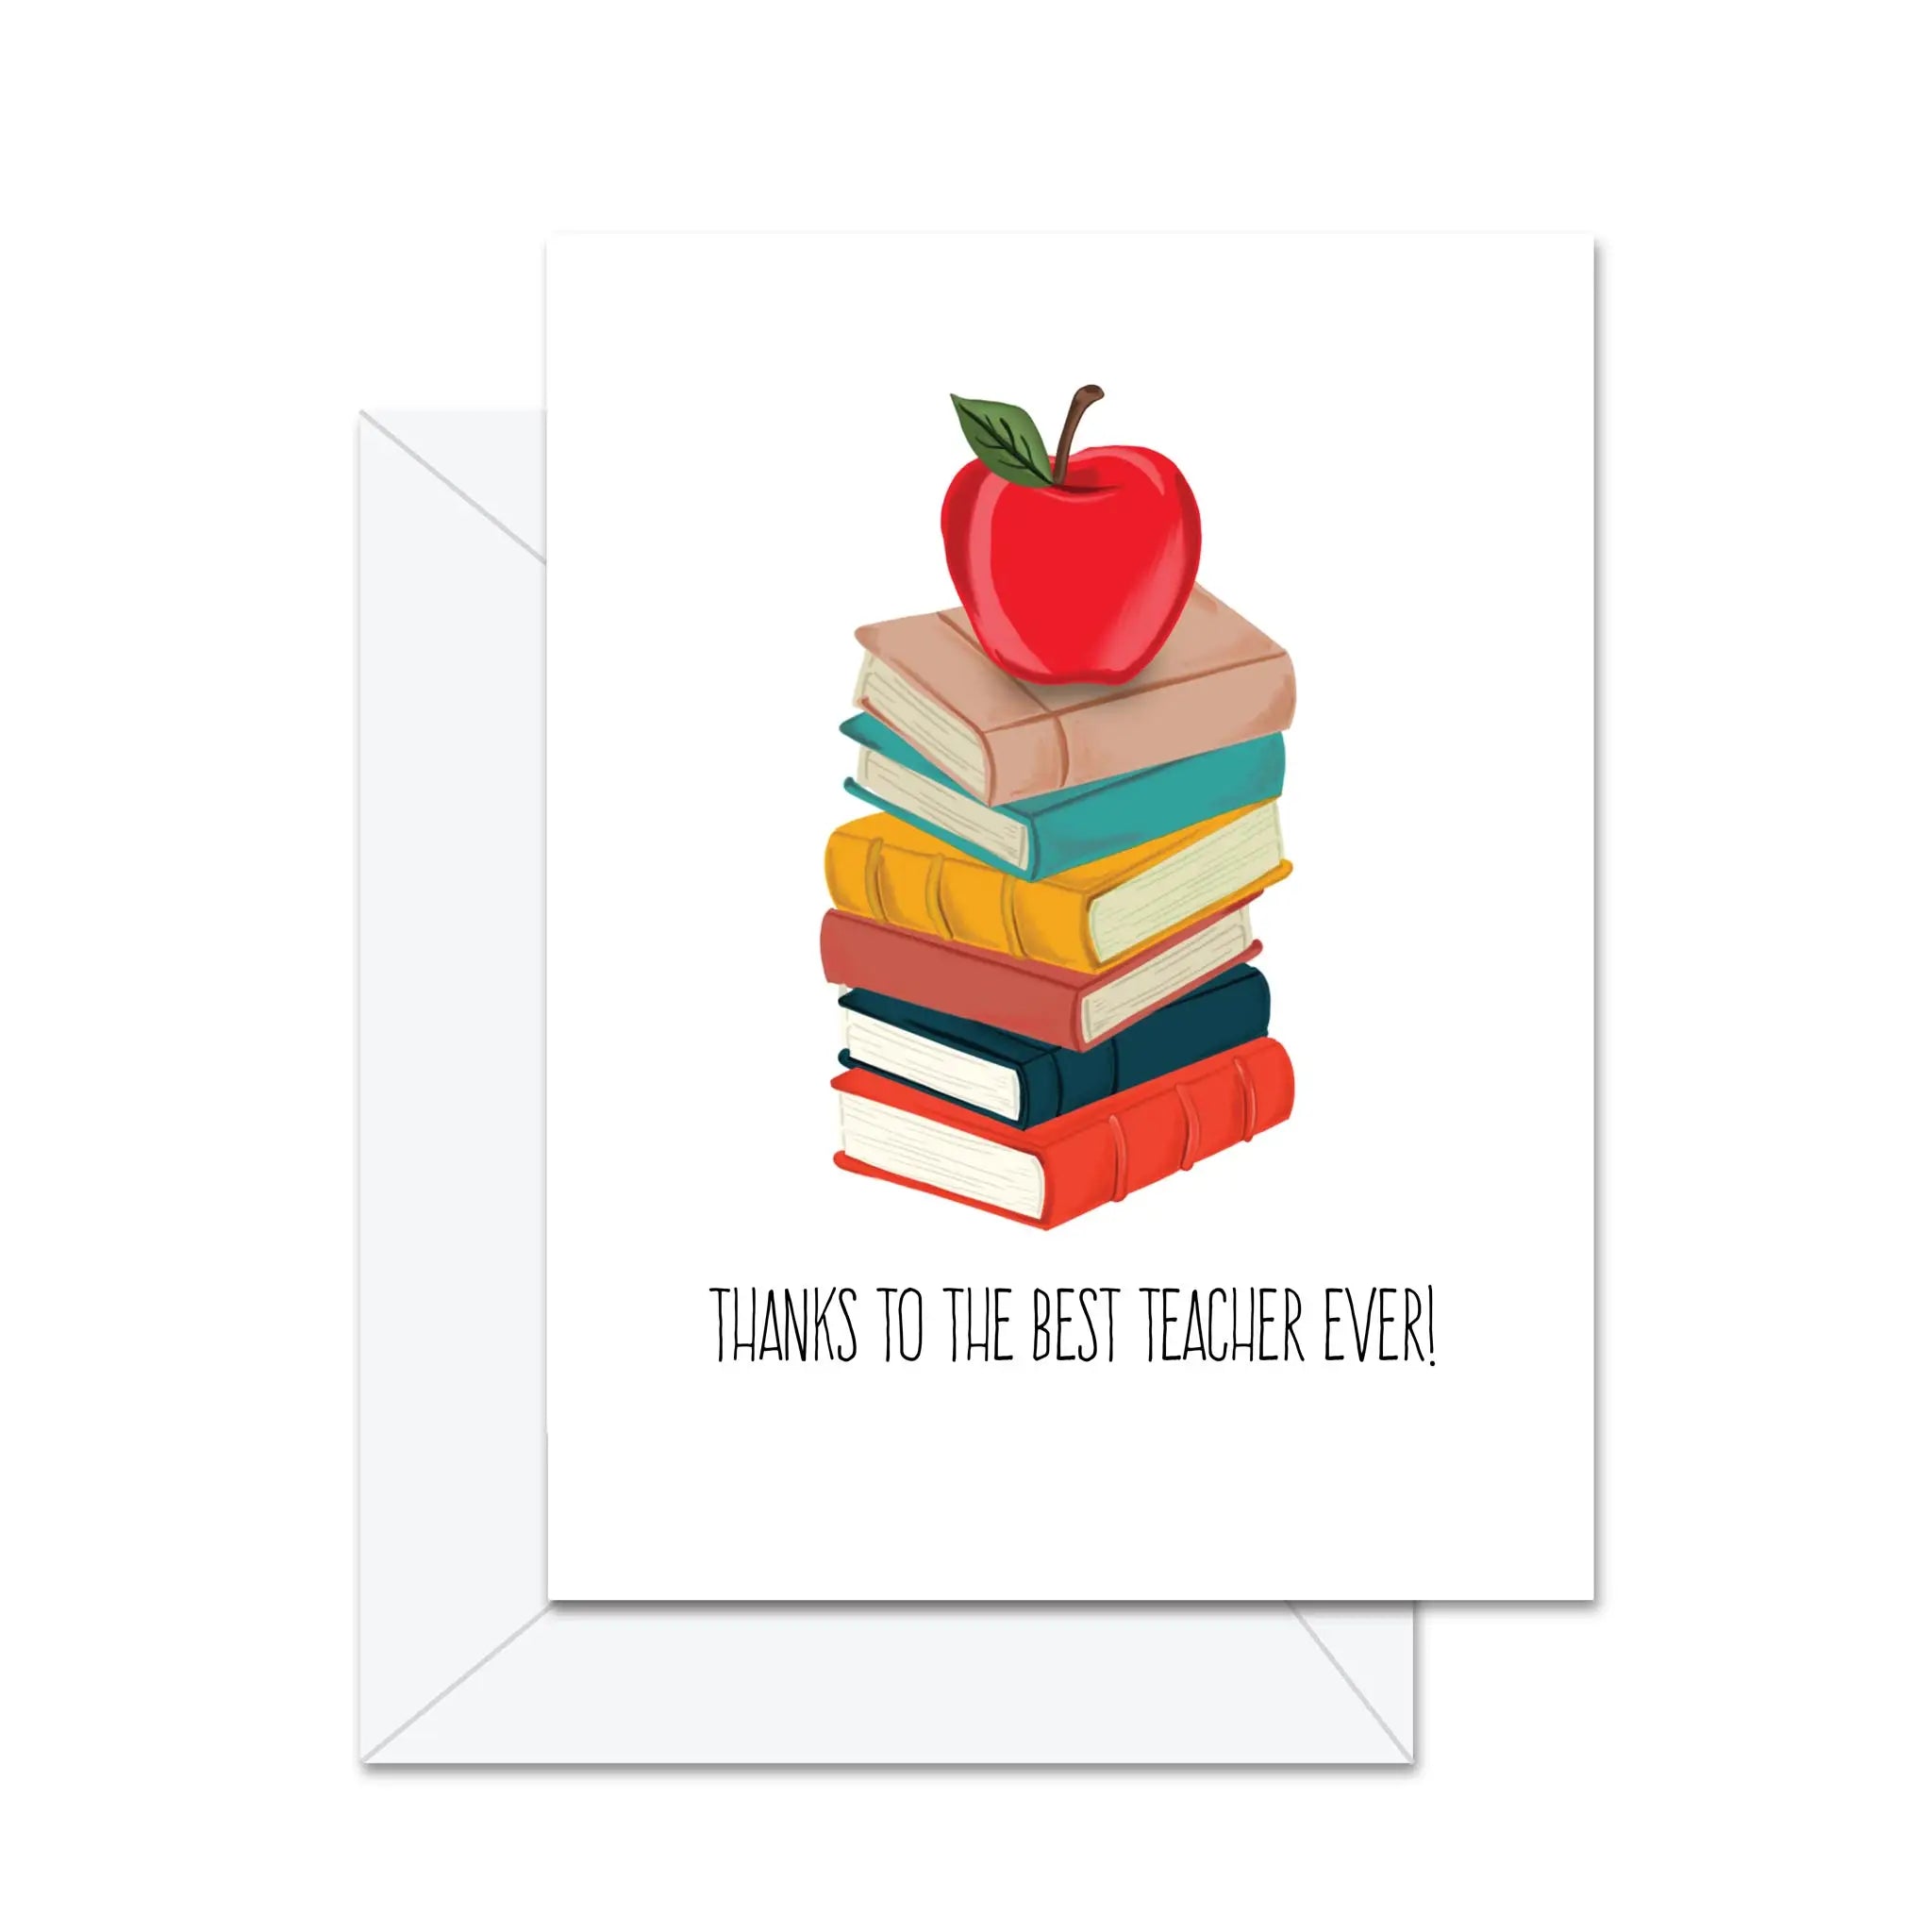 Thanks To The Best Teacher Ever! - Greeting Card